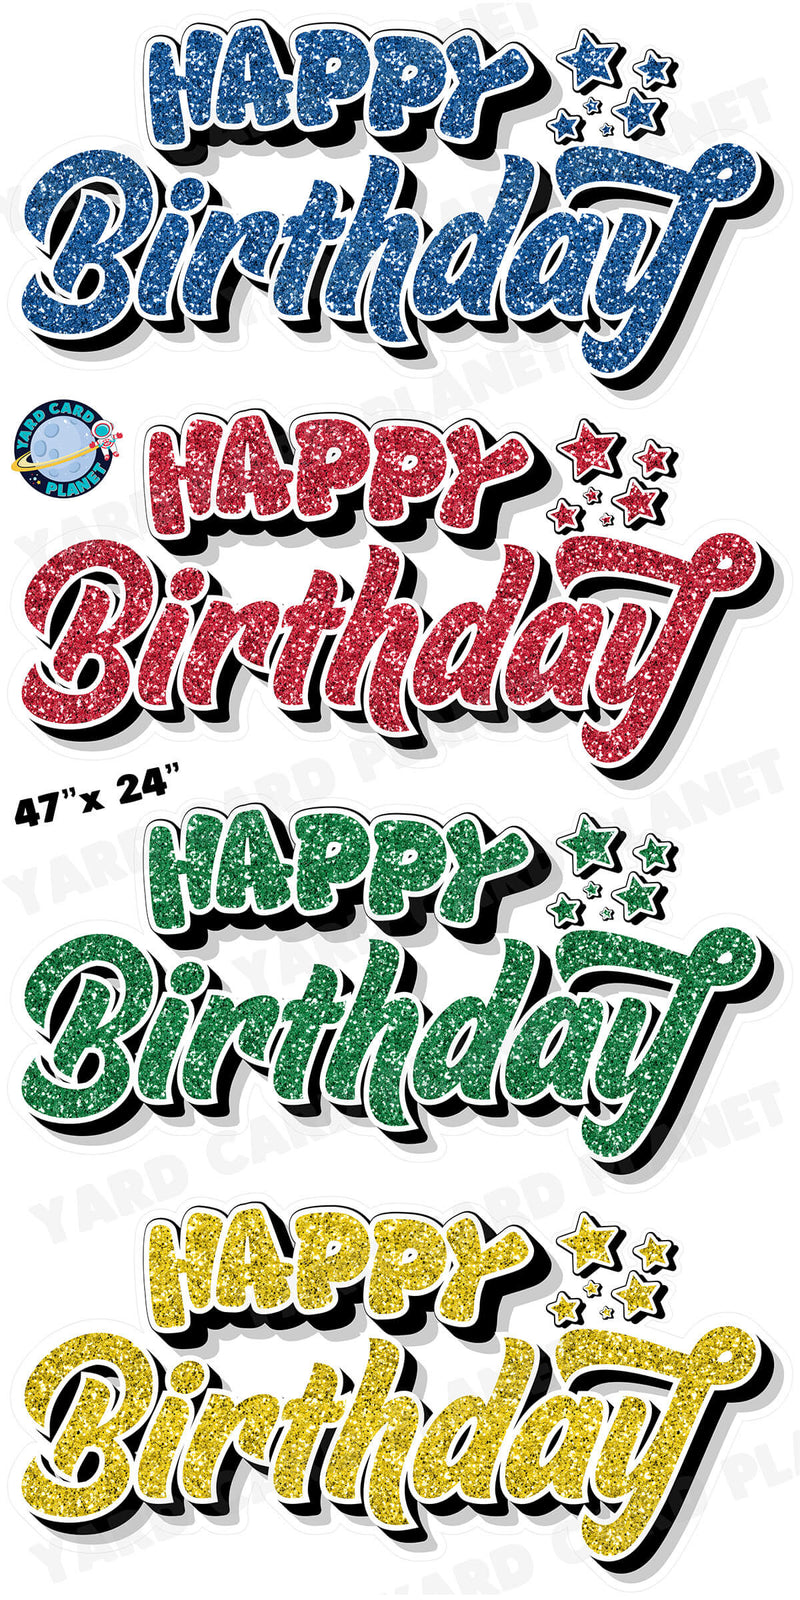 Happy Birthday EZ Quick Signs in Glitter Blue, Red, Green and Yellow Yard Card Set with Measurements